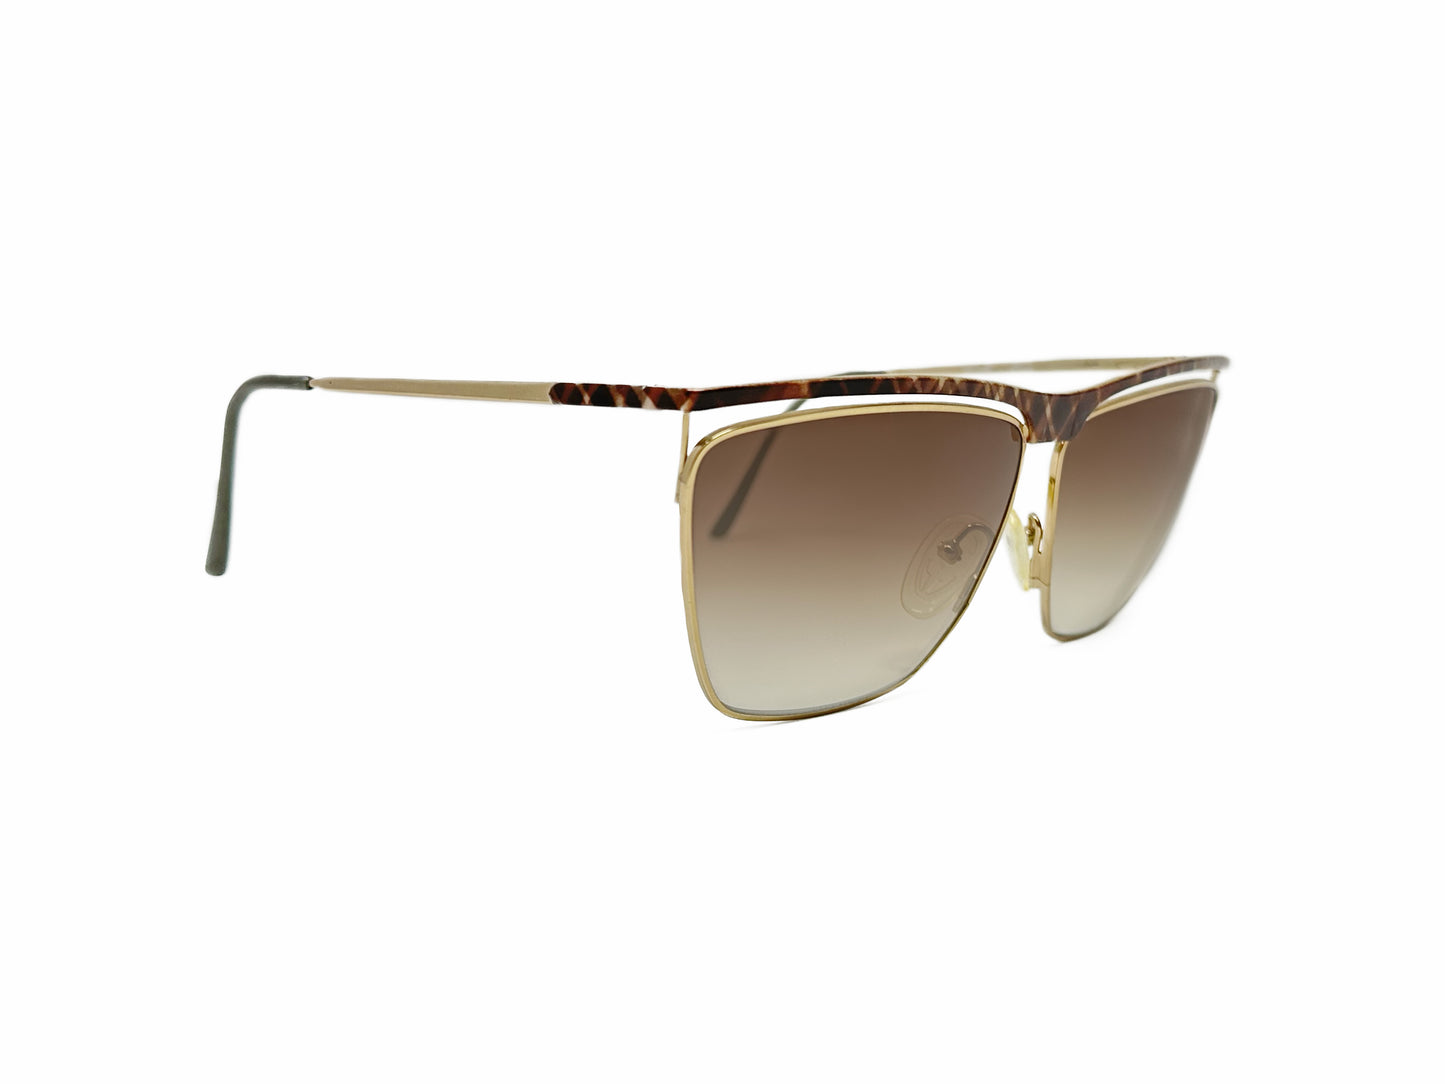 Nino Raw by Classic upward-angled rectangular sunglass. Model: Suntrend 303. Color: Brown - Brown plaid pattern with gold metal trim and brown gradient lenses. Side view.